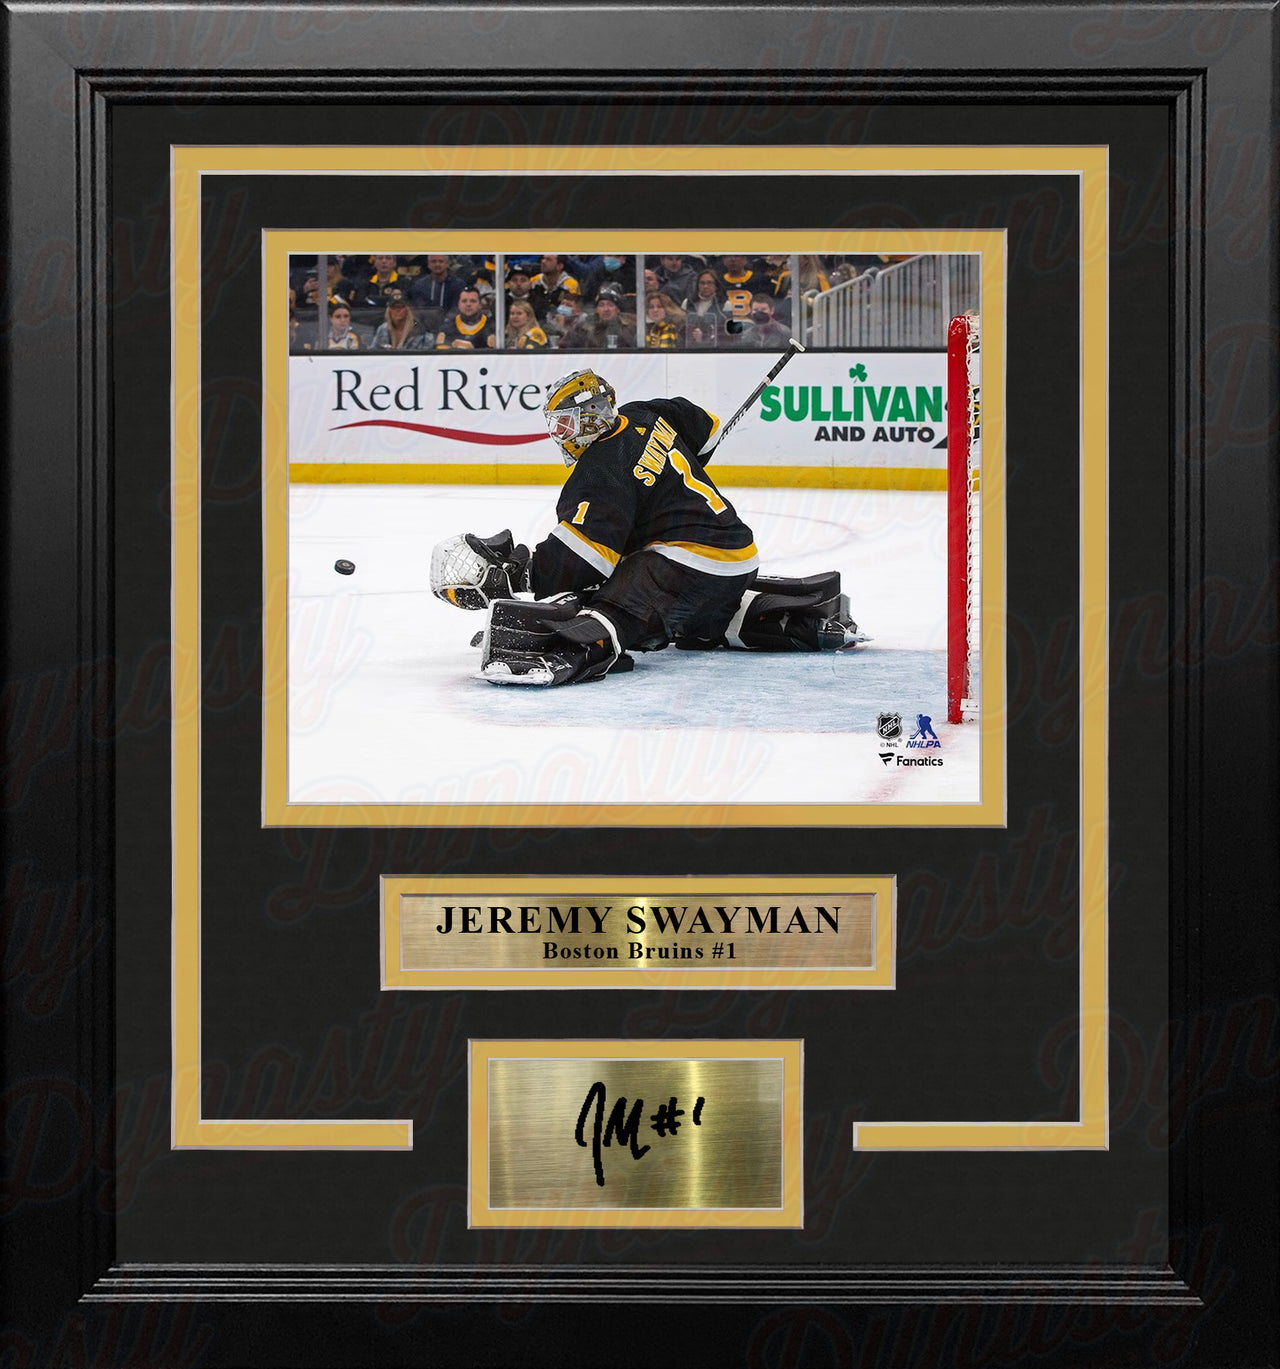 Jeremy Swayman in Action Boston Bruins 8" x 10" Framed Hockey Photo with Engraved Autograph - Dynasty Sports & Framing 